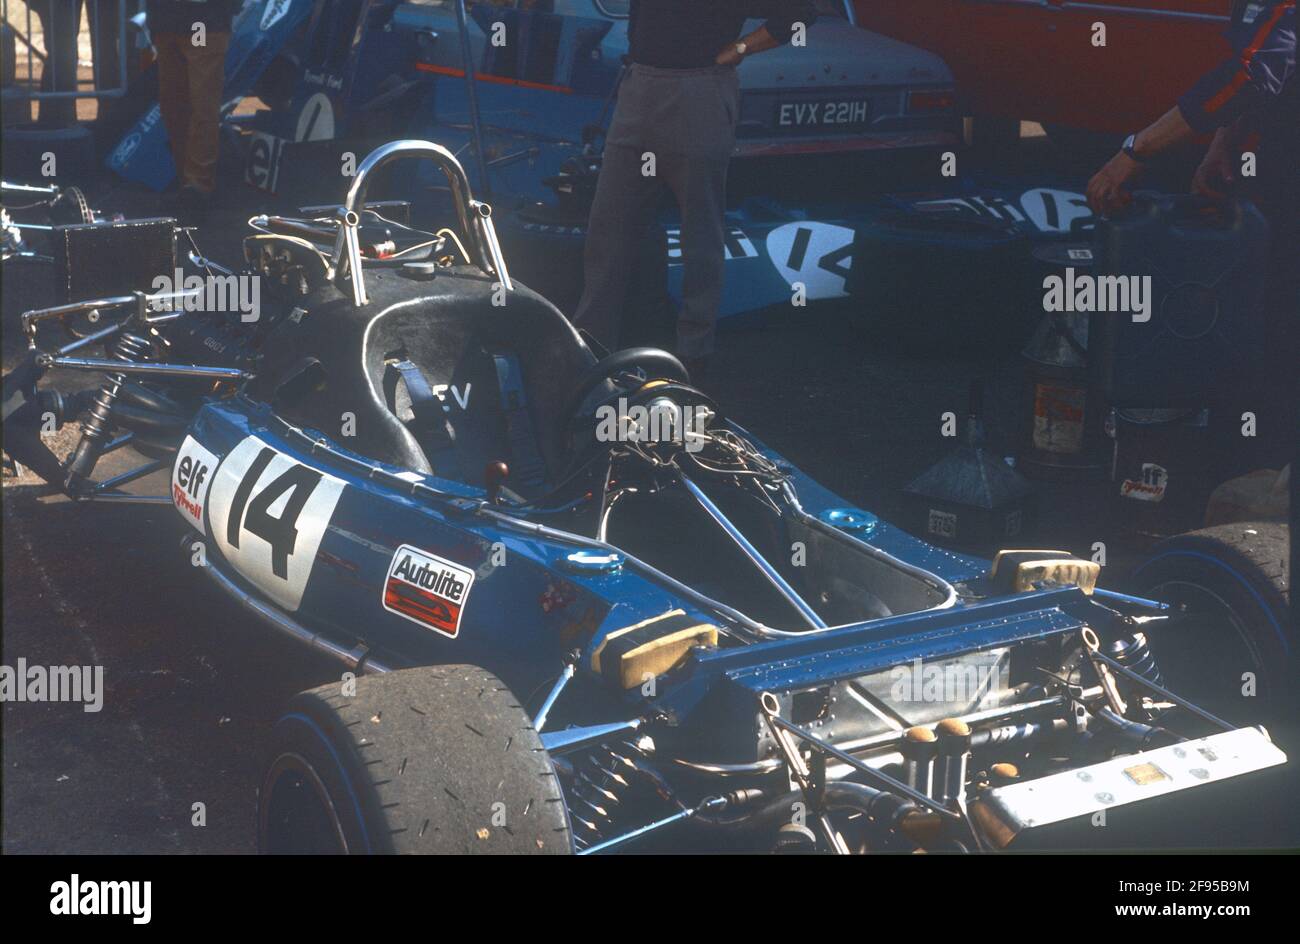 The Tyrrell 002 of Francois Cevert stripped down  in the Silverstone paddock during practice for the 1971 British Grand Prix. Stock Photo